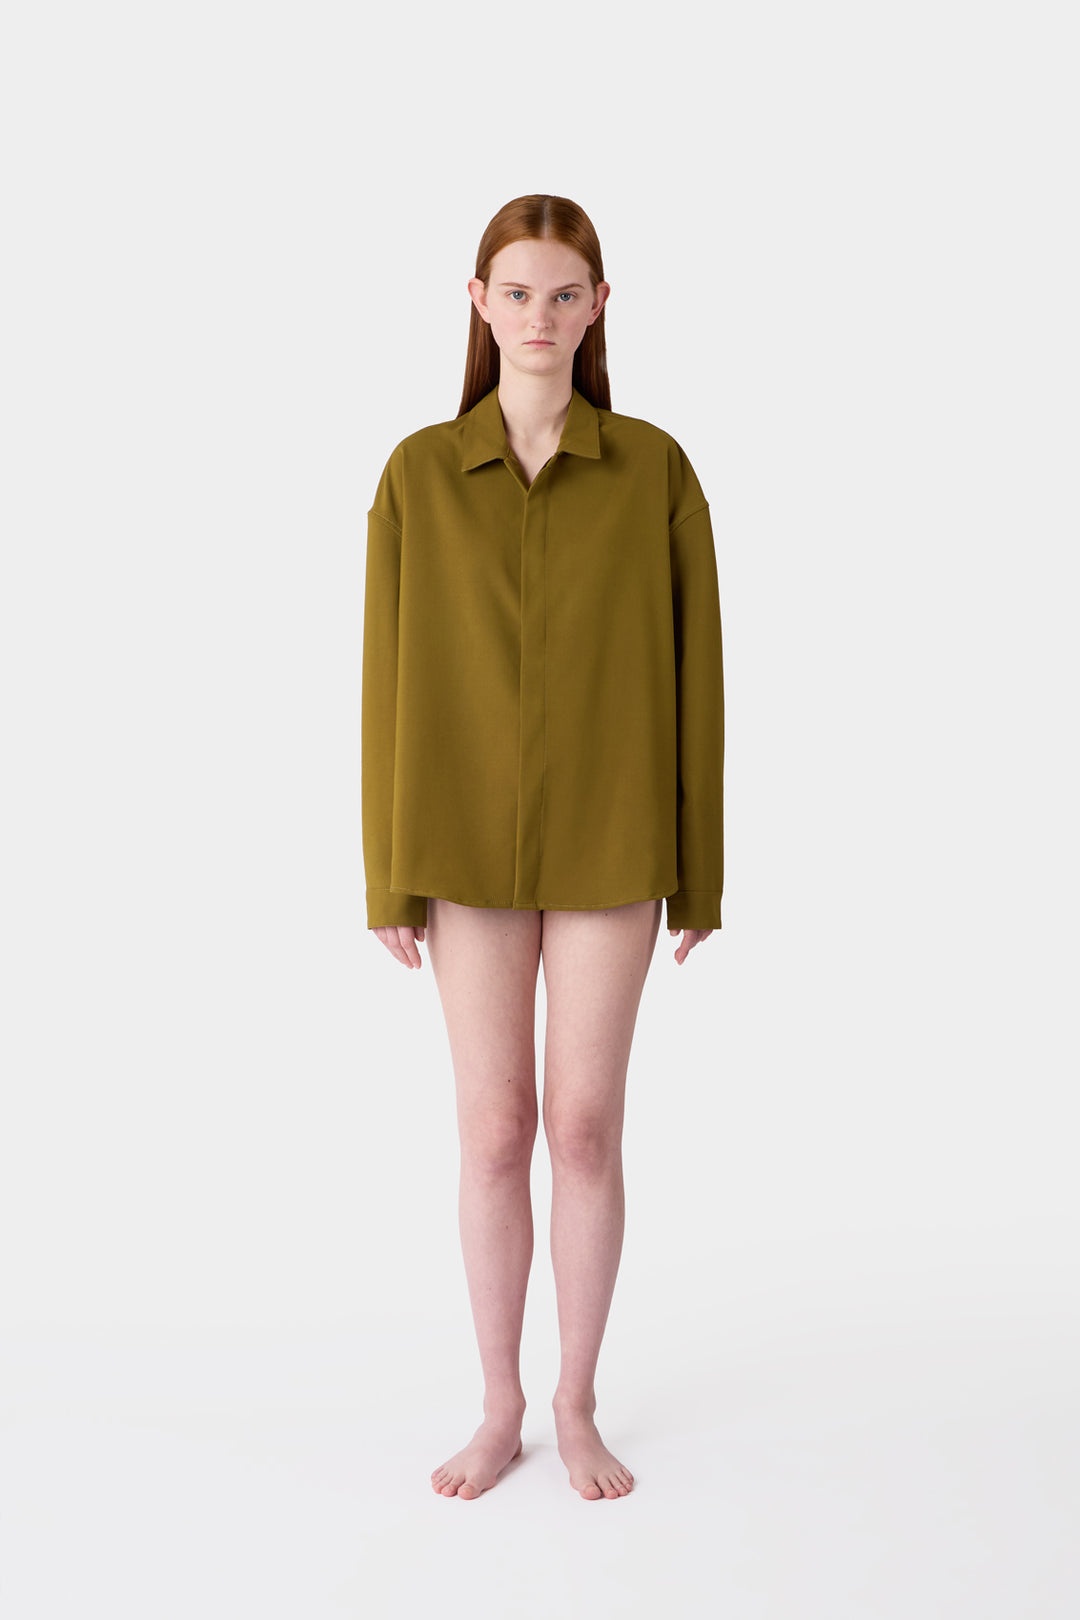 OVER SHIRT / olive green - 5